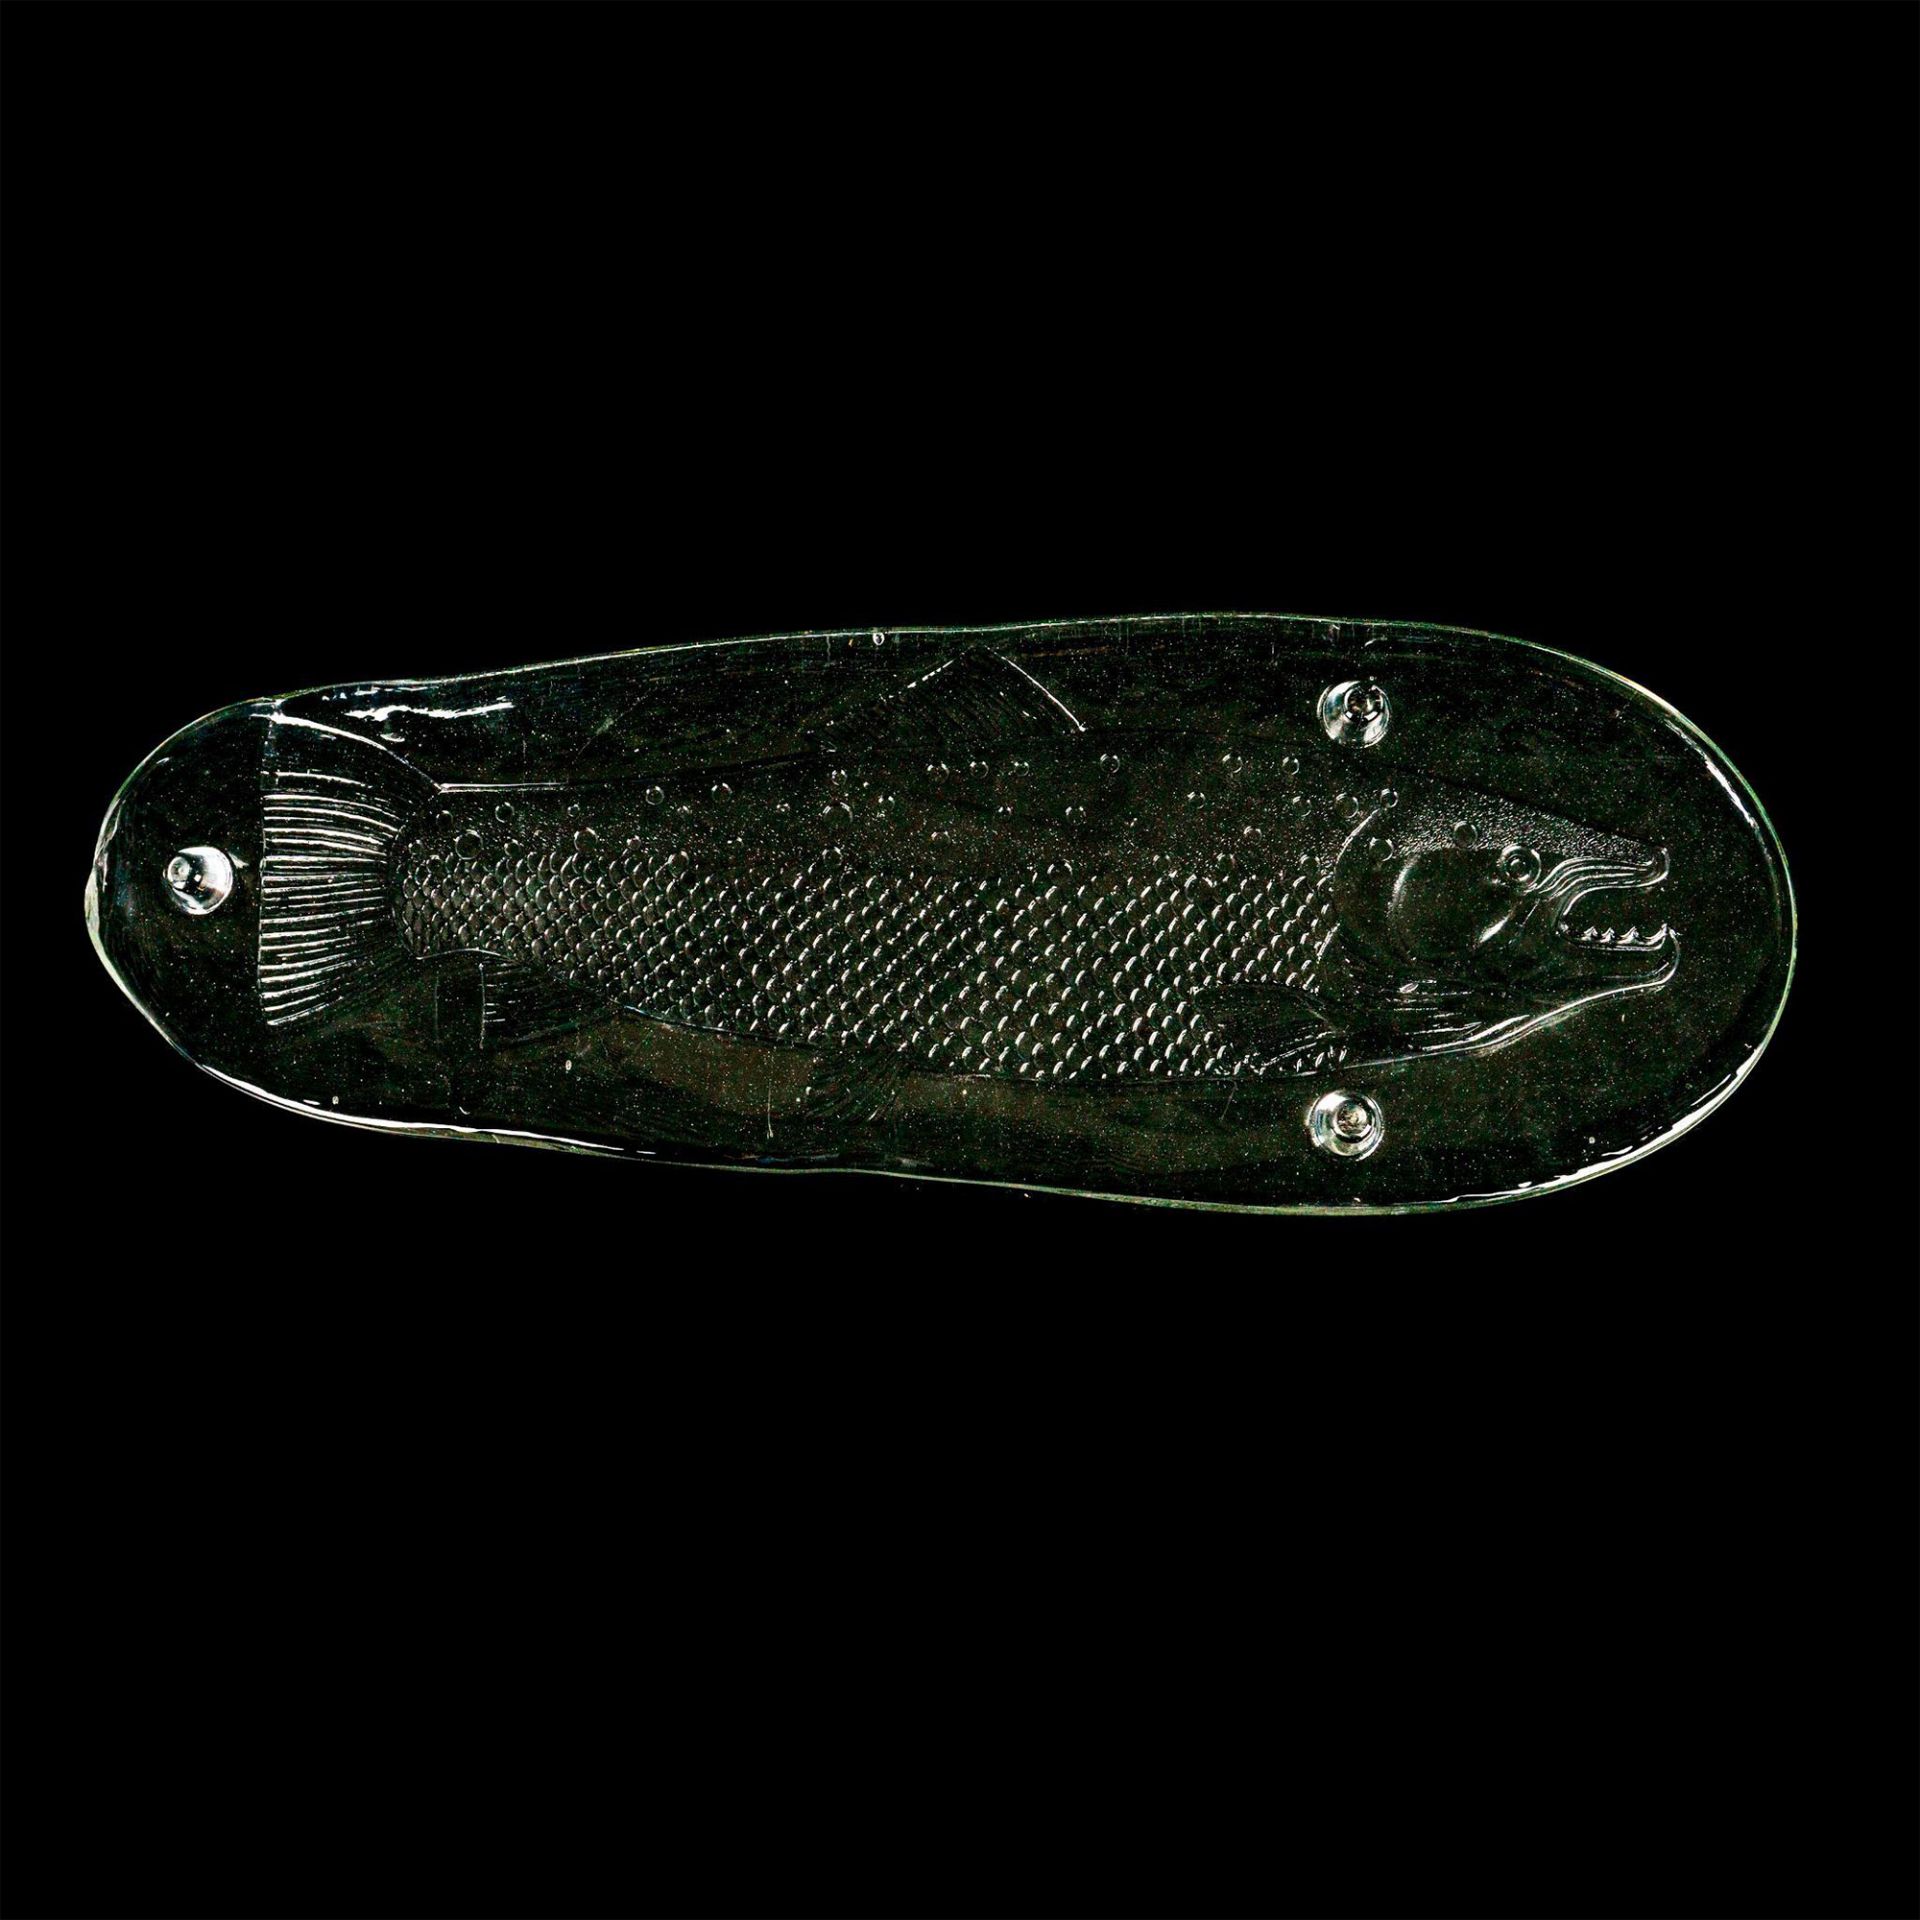 Etched Glass Fish Serving Platter - Image 2 of 3